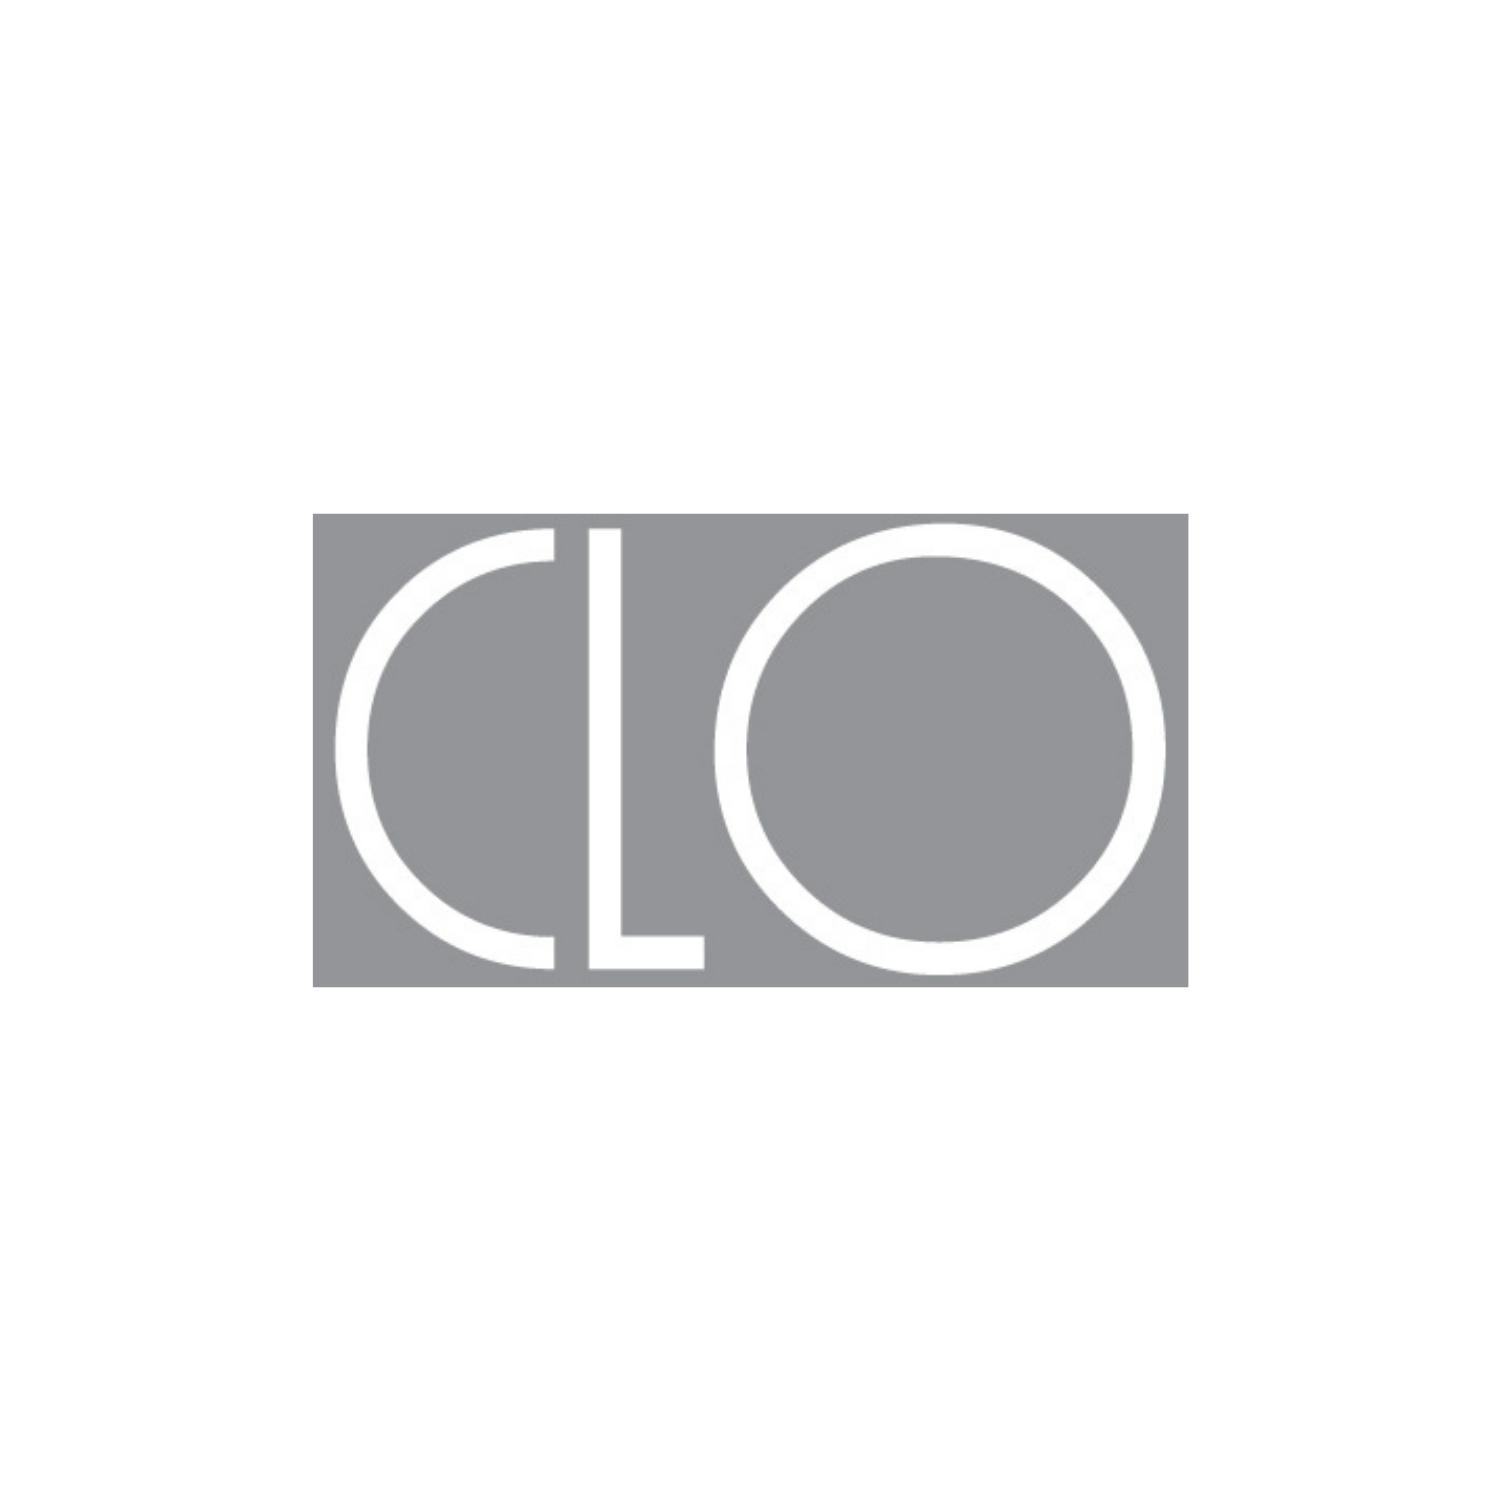 Read more about the article Clo Concept